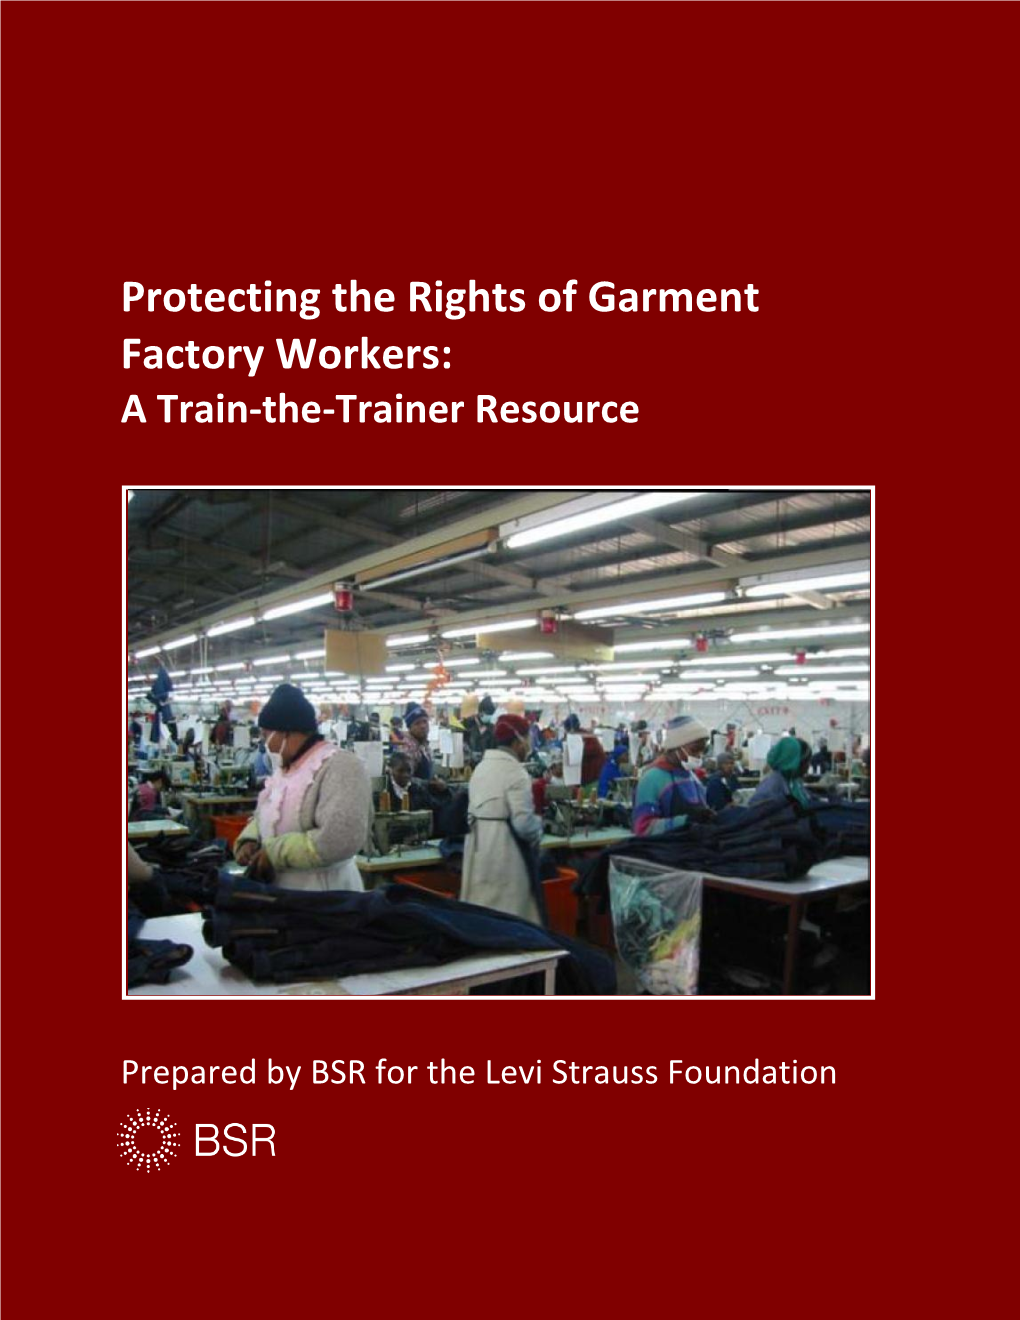 Protecting the Rights of Garment Factory Workers: a Train-The-Trainer Resource